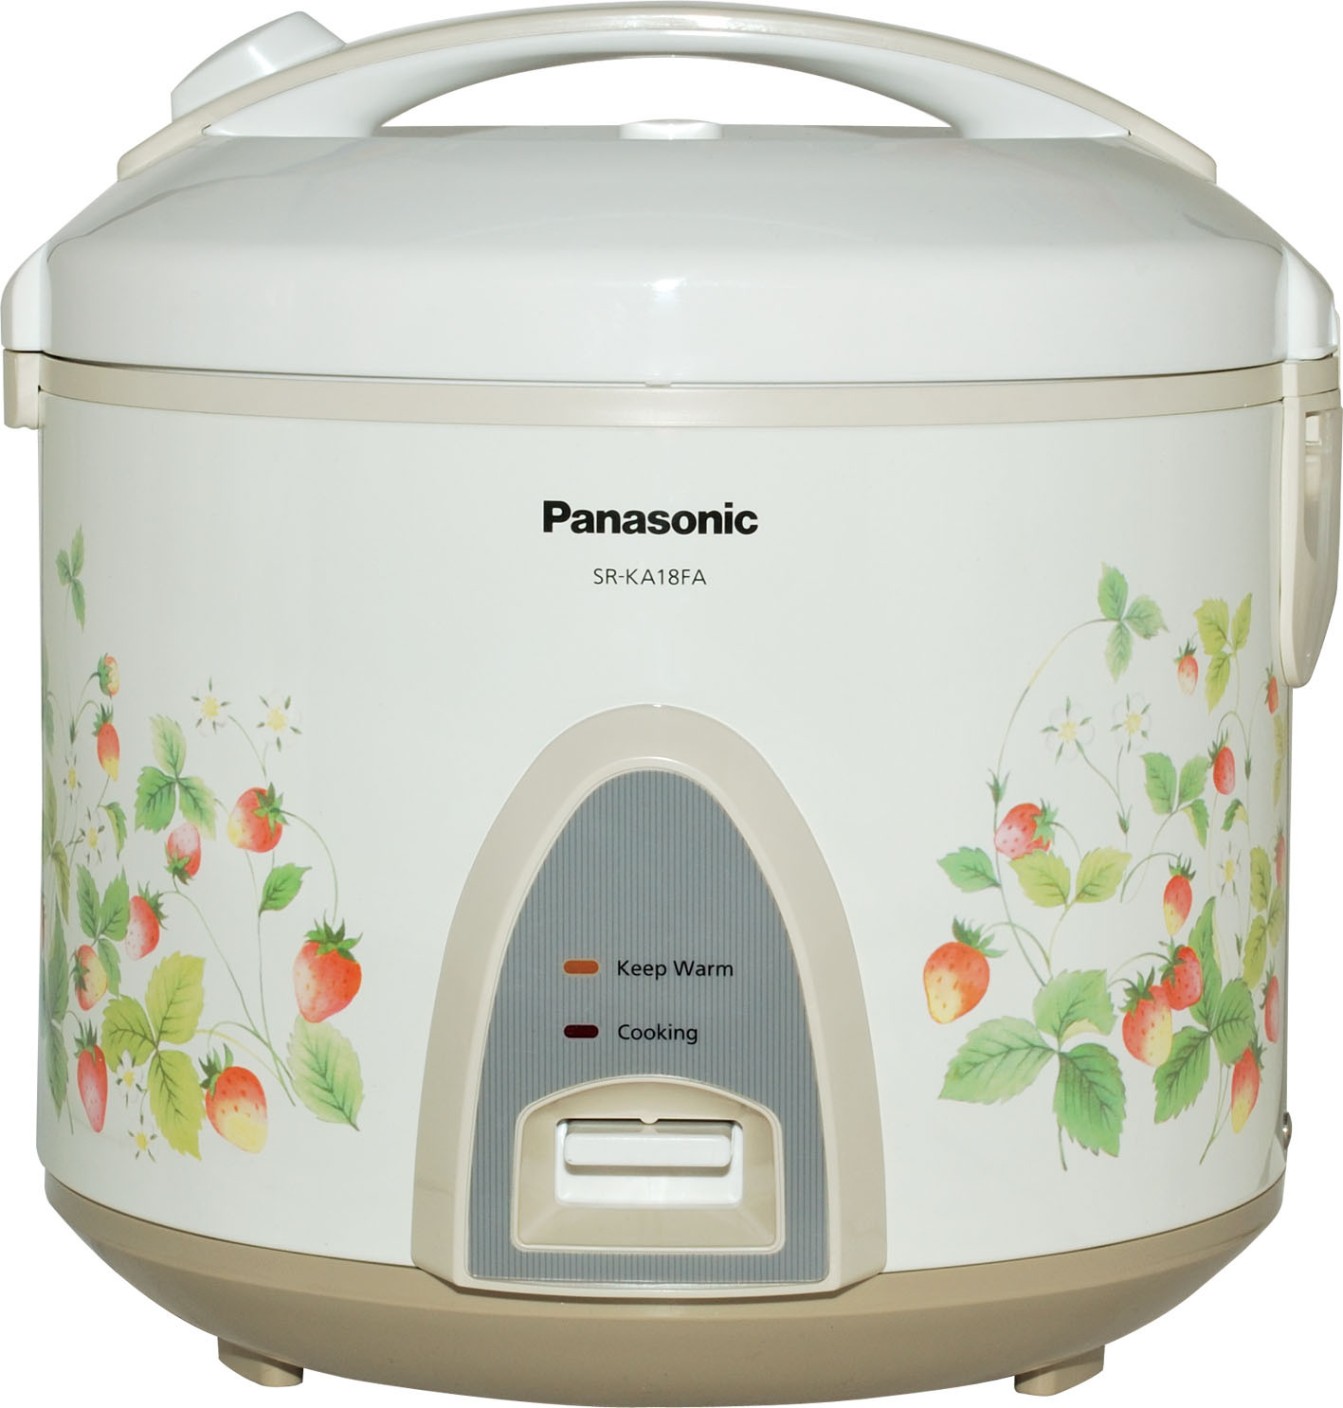 Panasonic SR KA 18 A Electric Rice Cooker with Steaming Feature Price ...